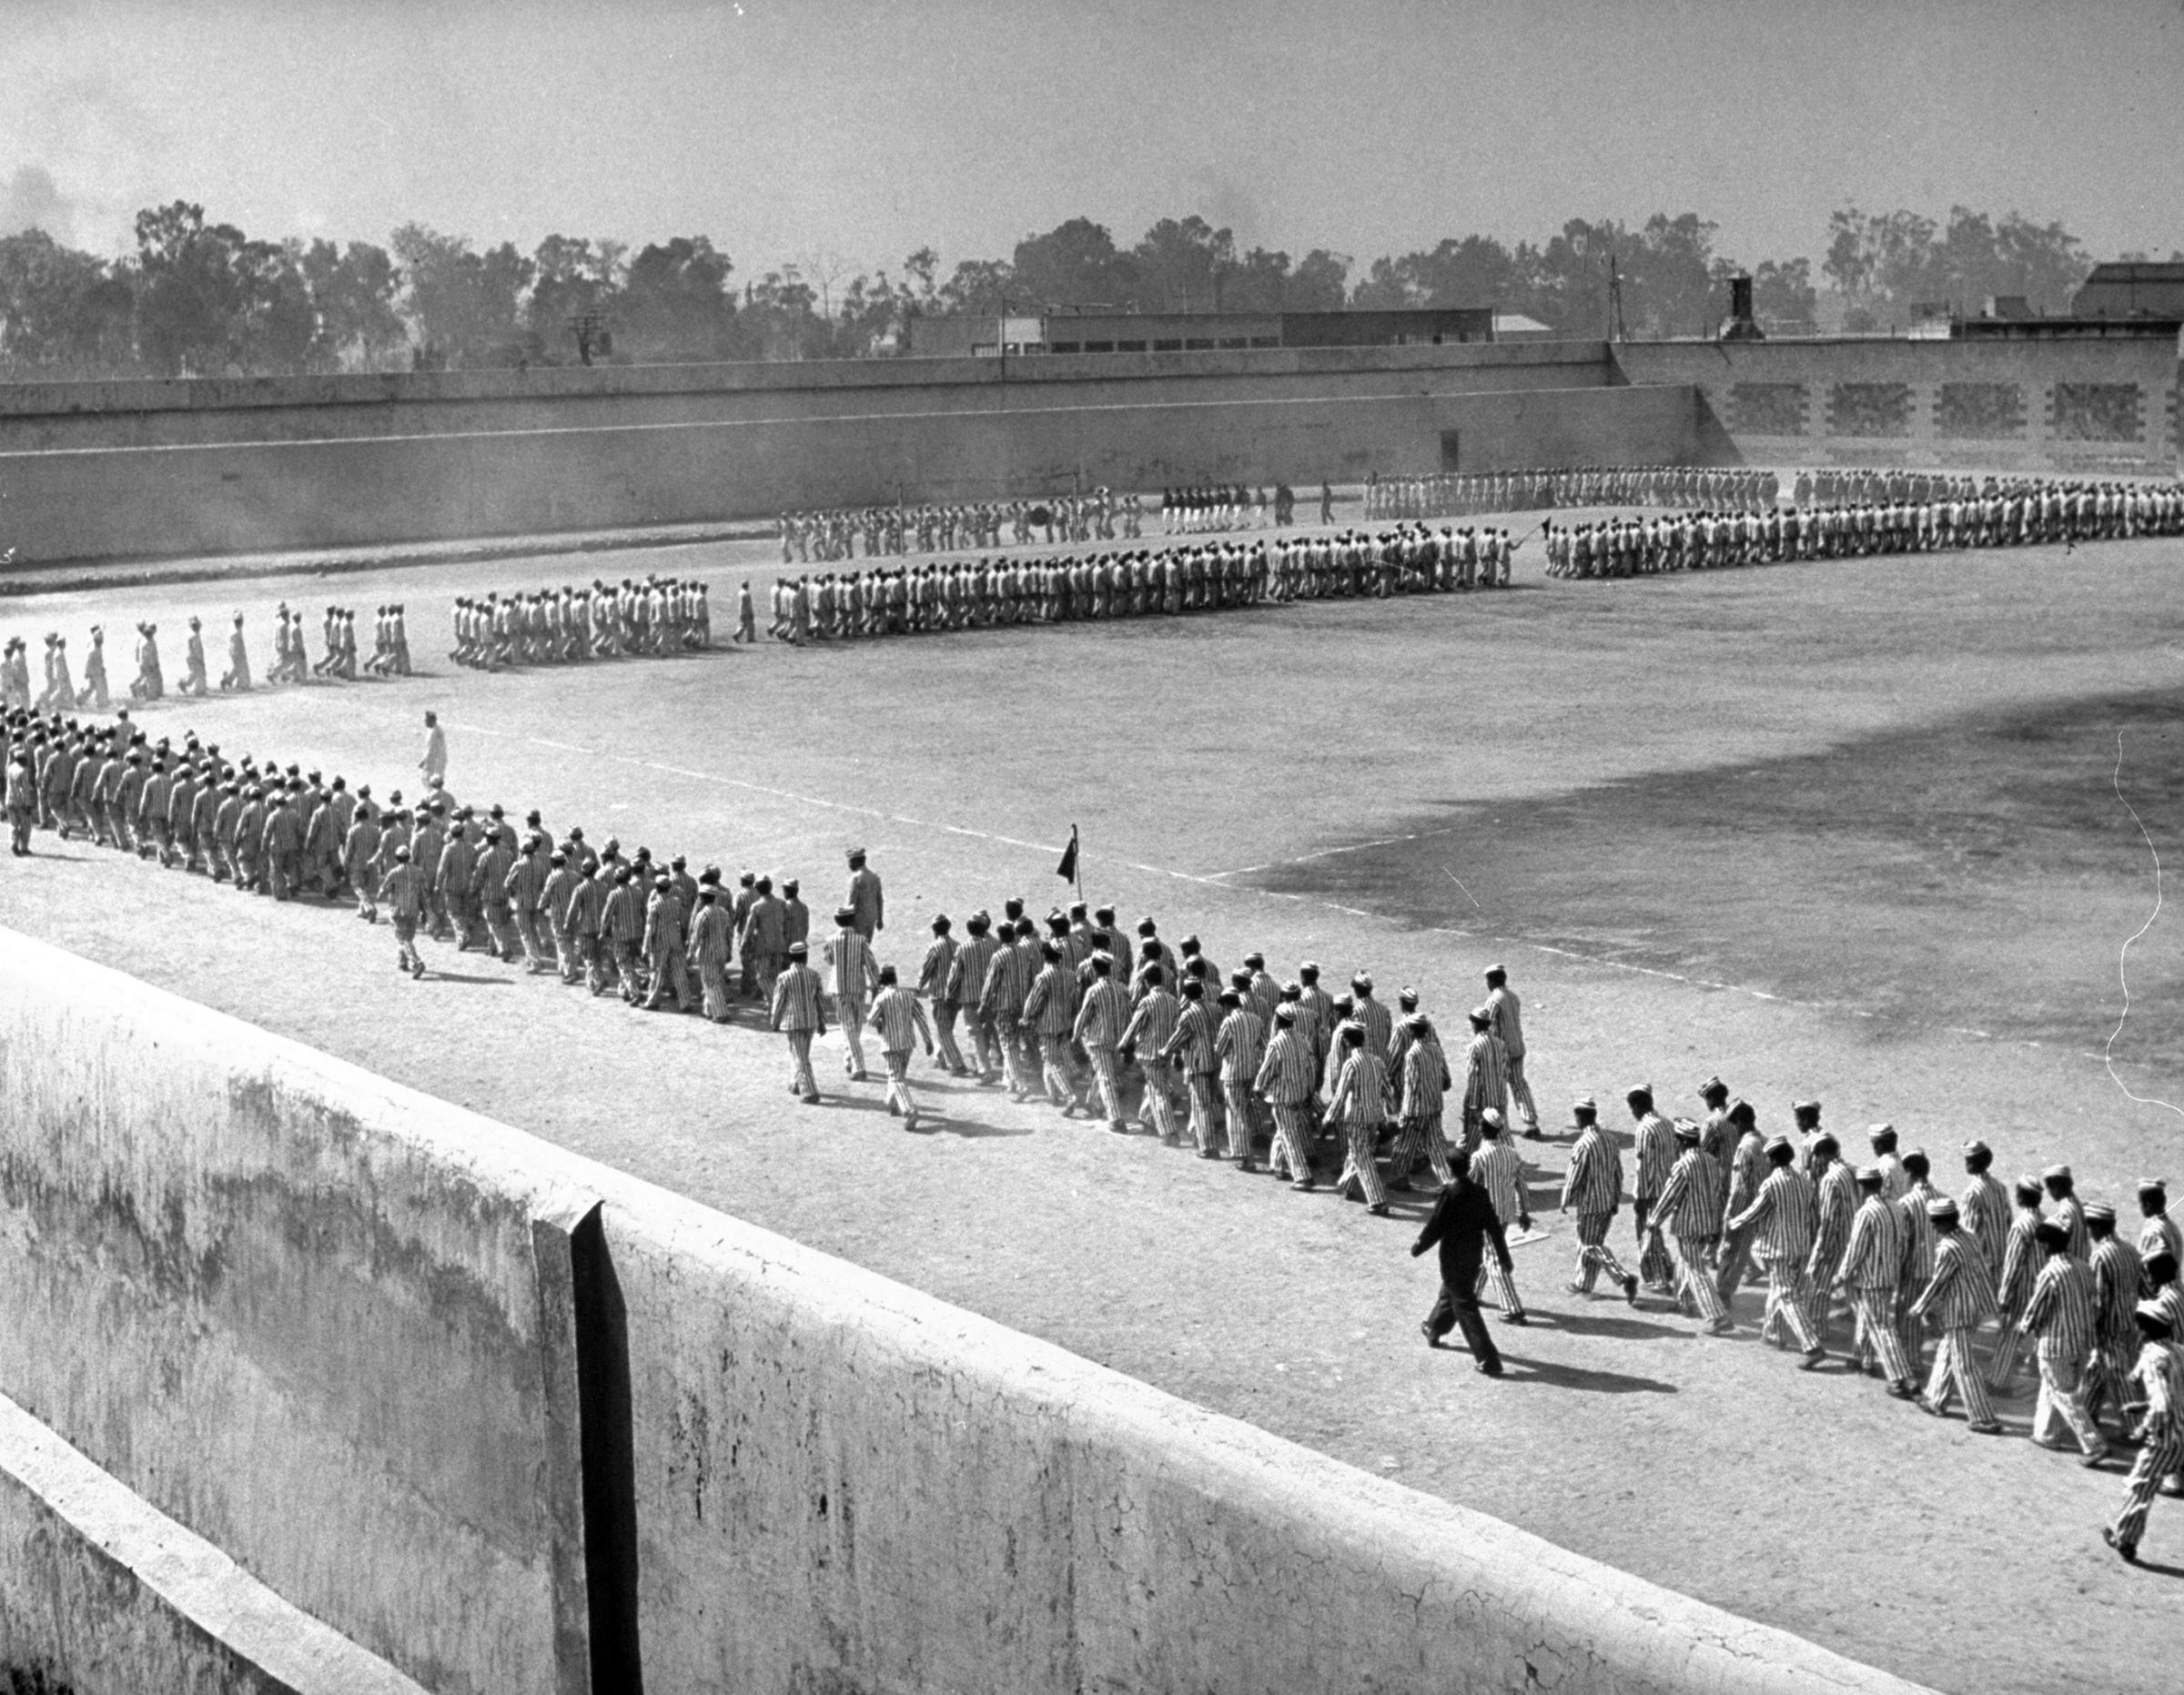 Prisoner parade moves smartly around the prison athletic field to band music. Army-style marching is part of new warden's program to improve morale.